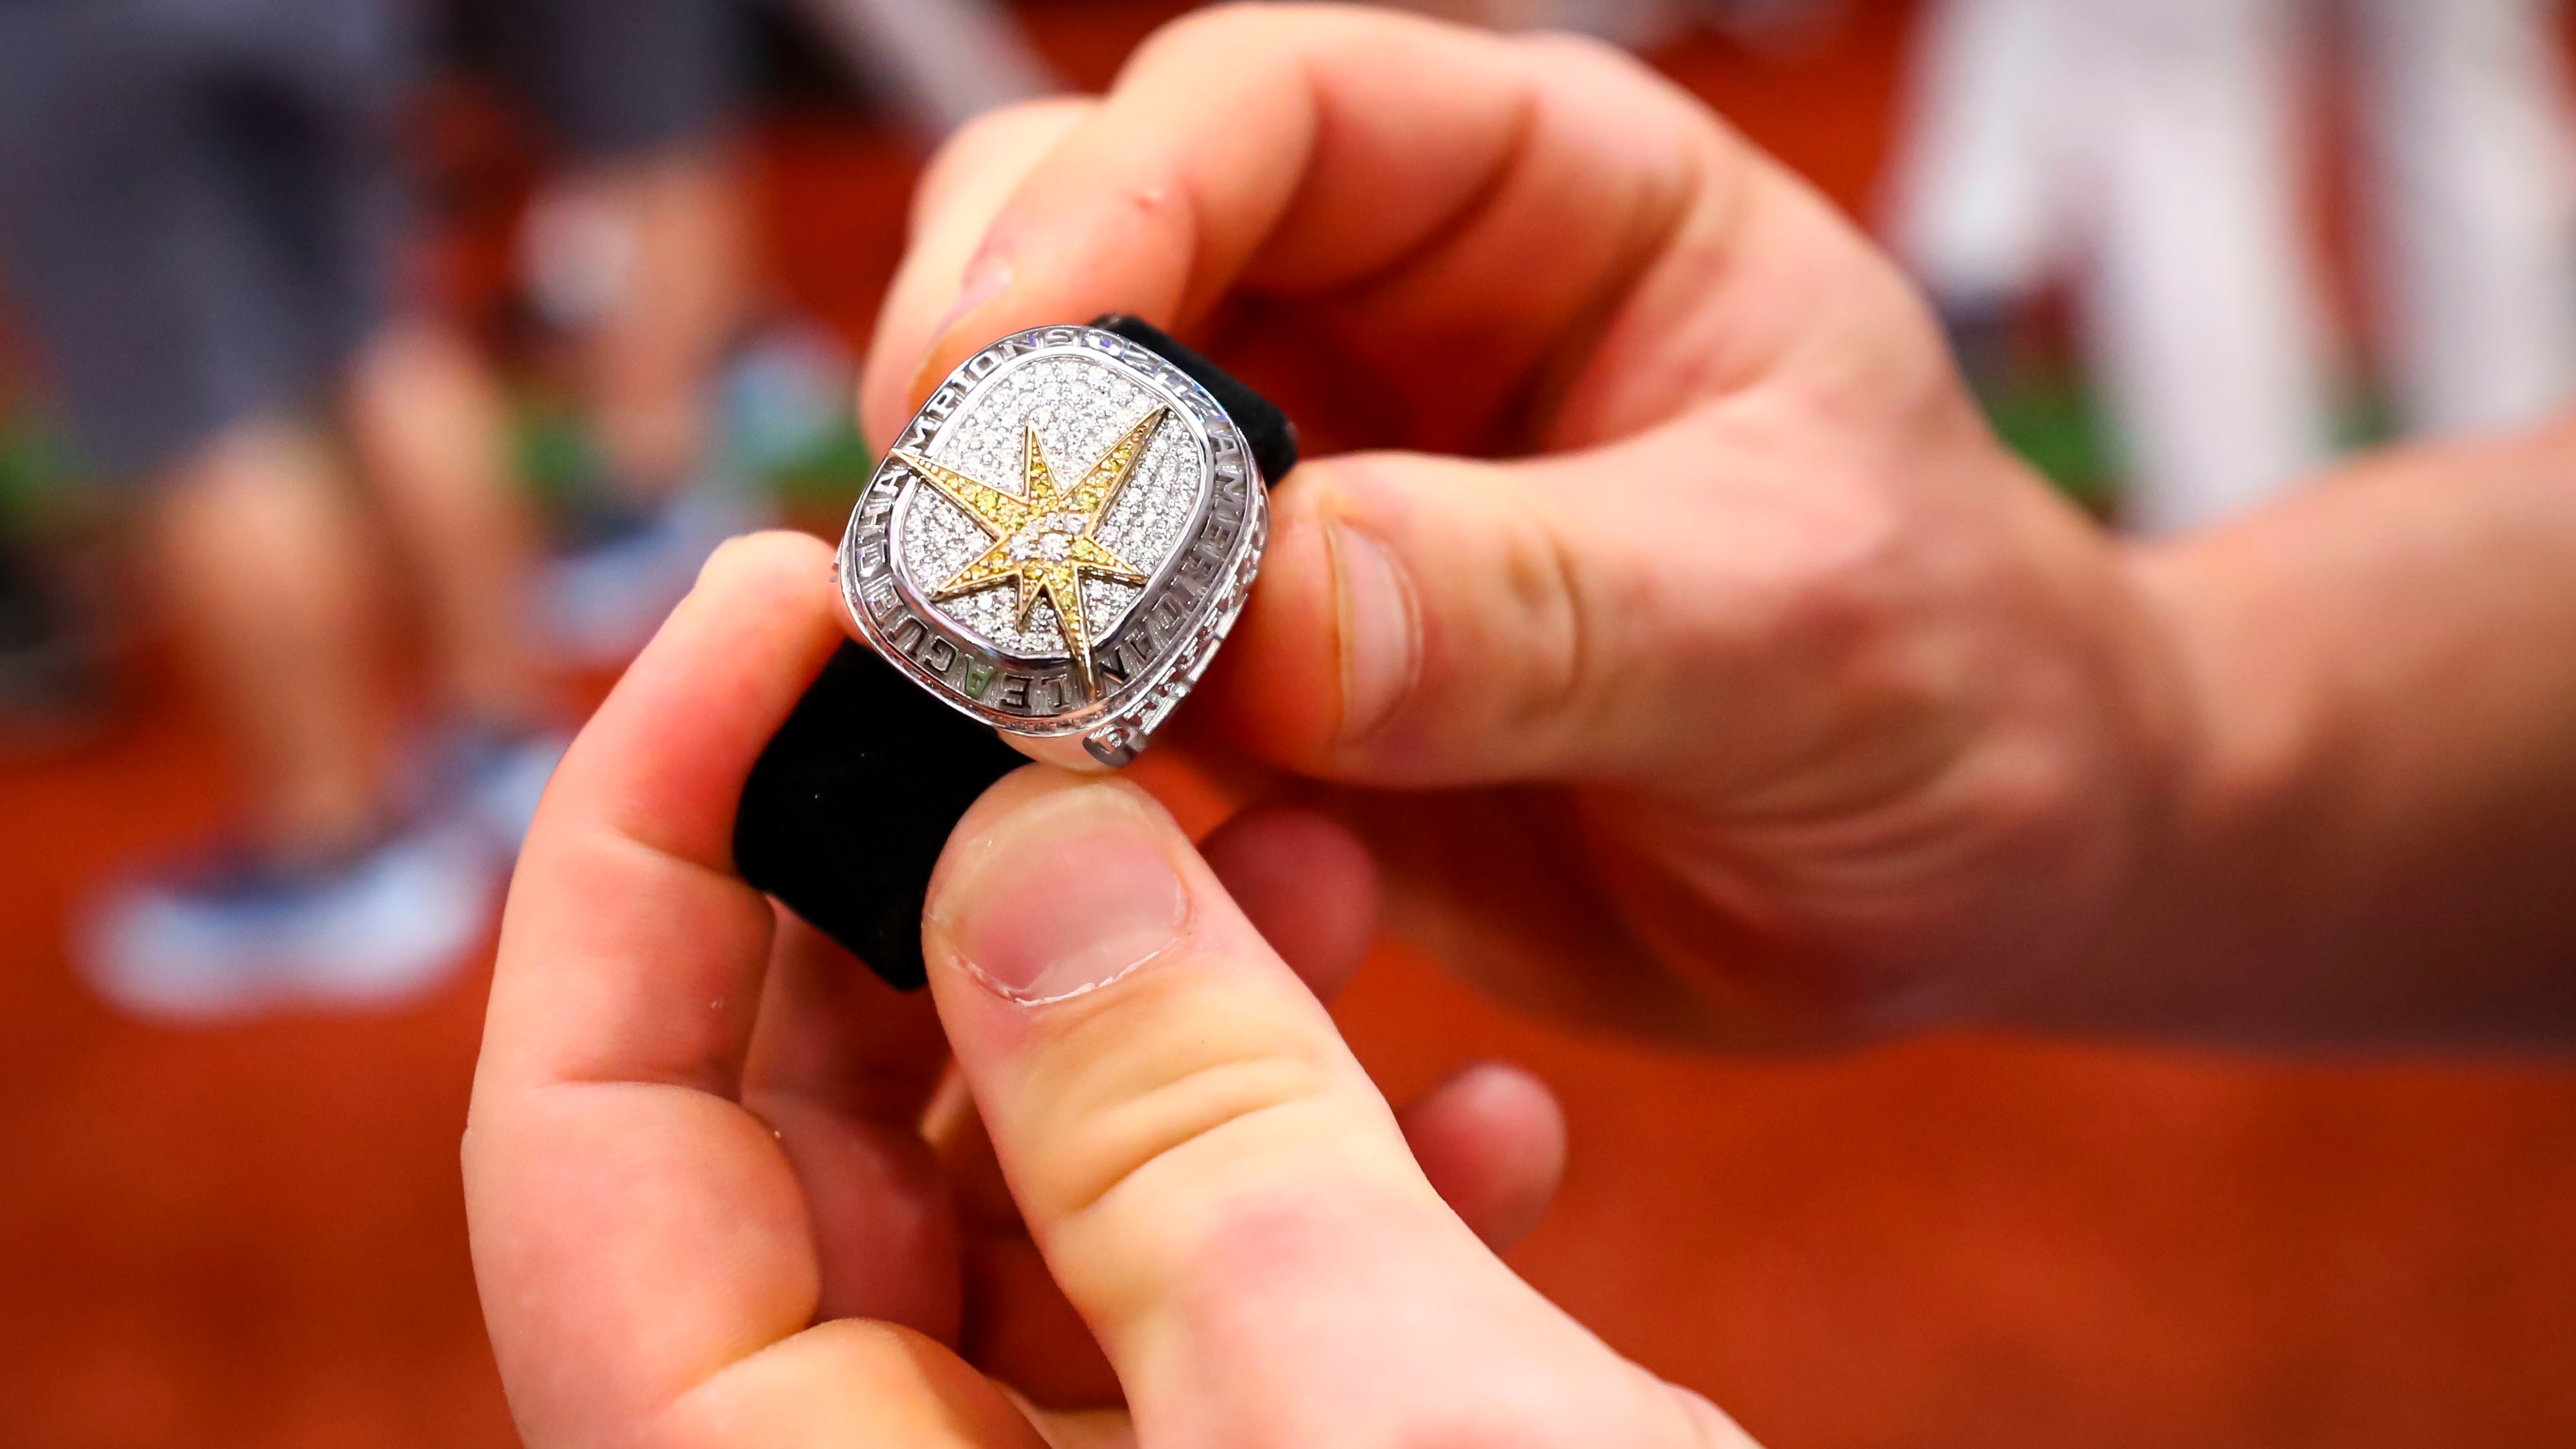 Video: Braves Reveal 2021 World Series Rings Featuring 755 Total